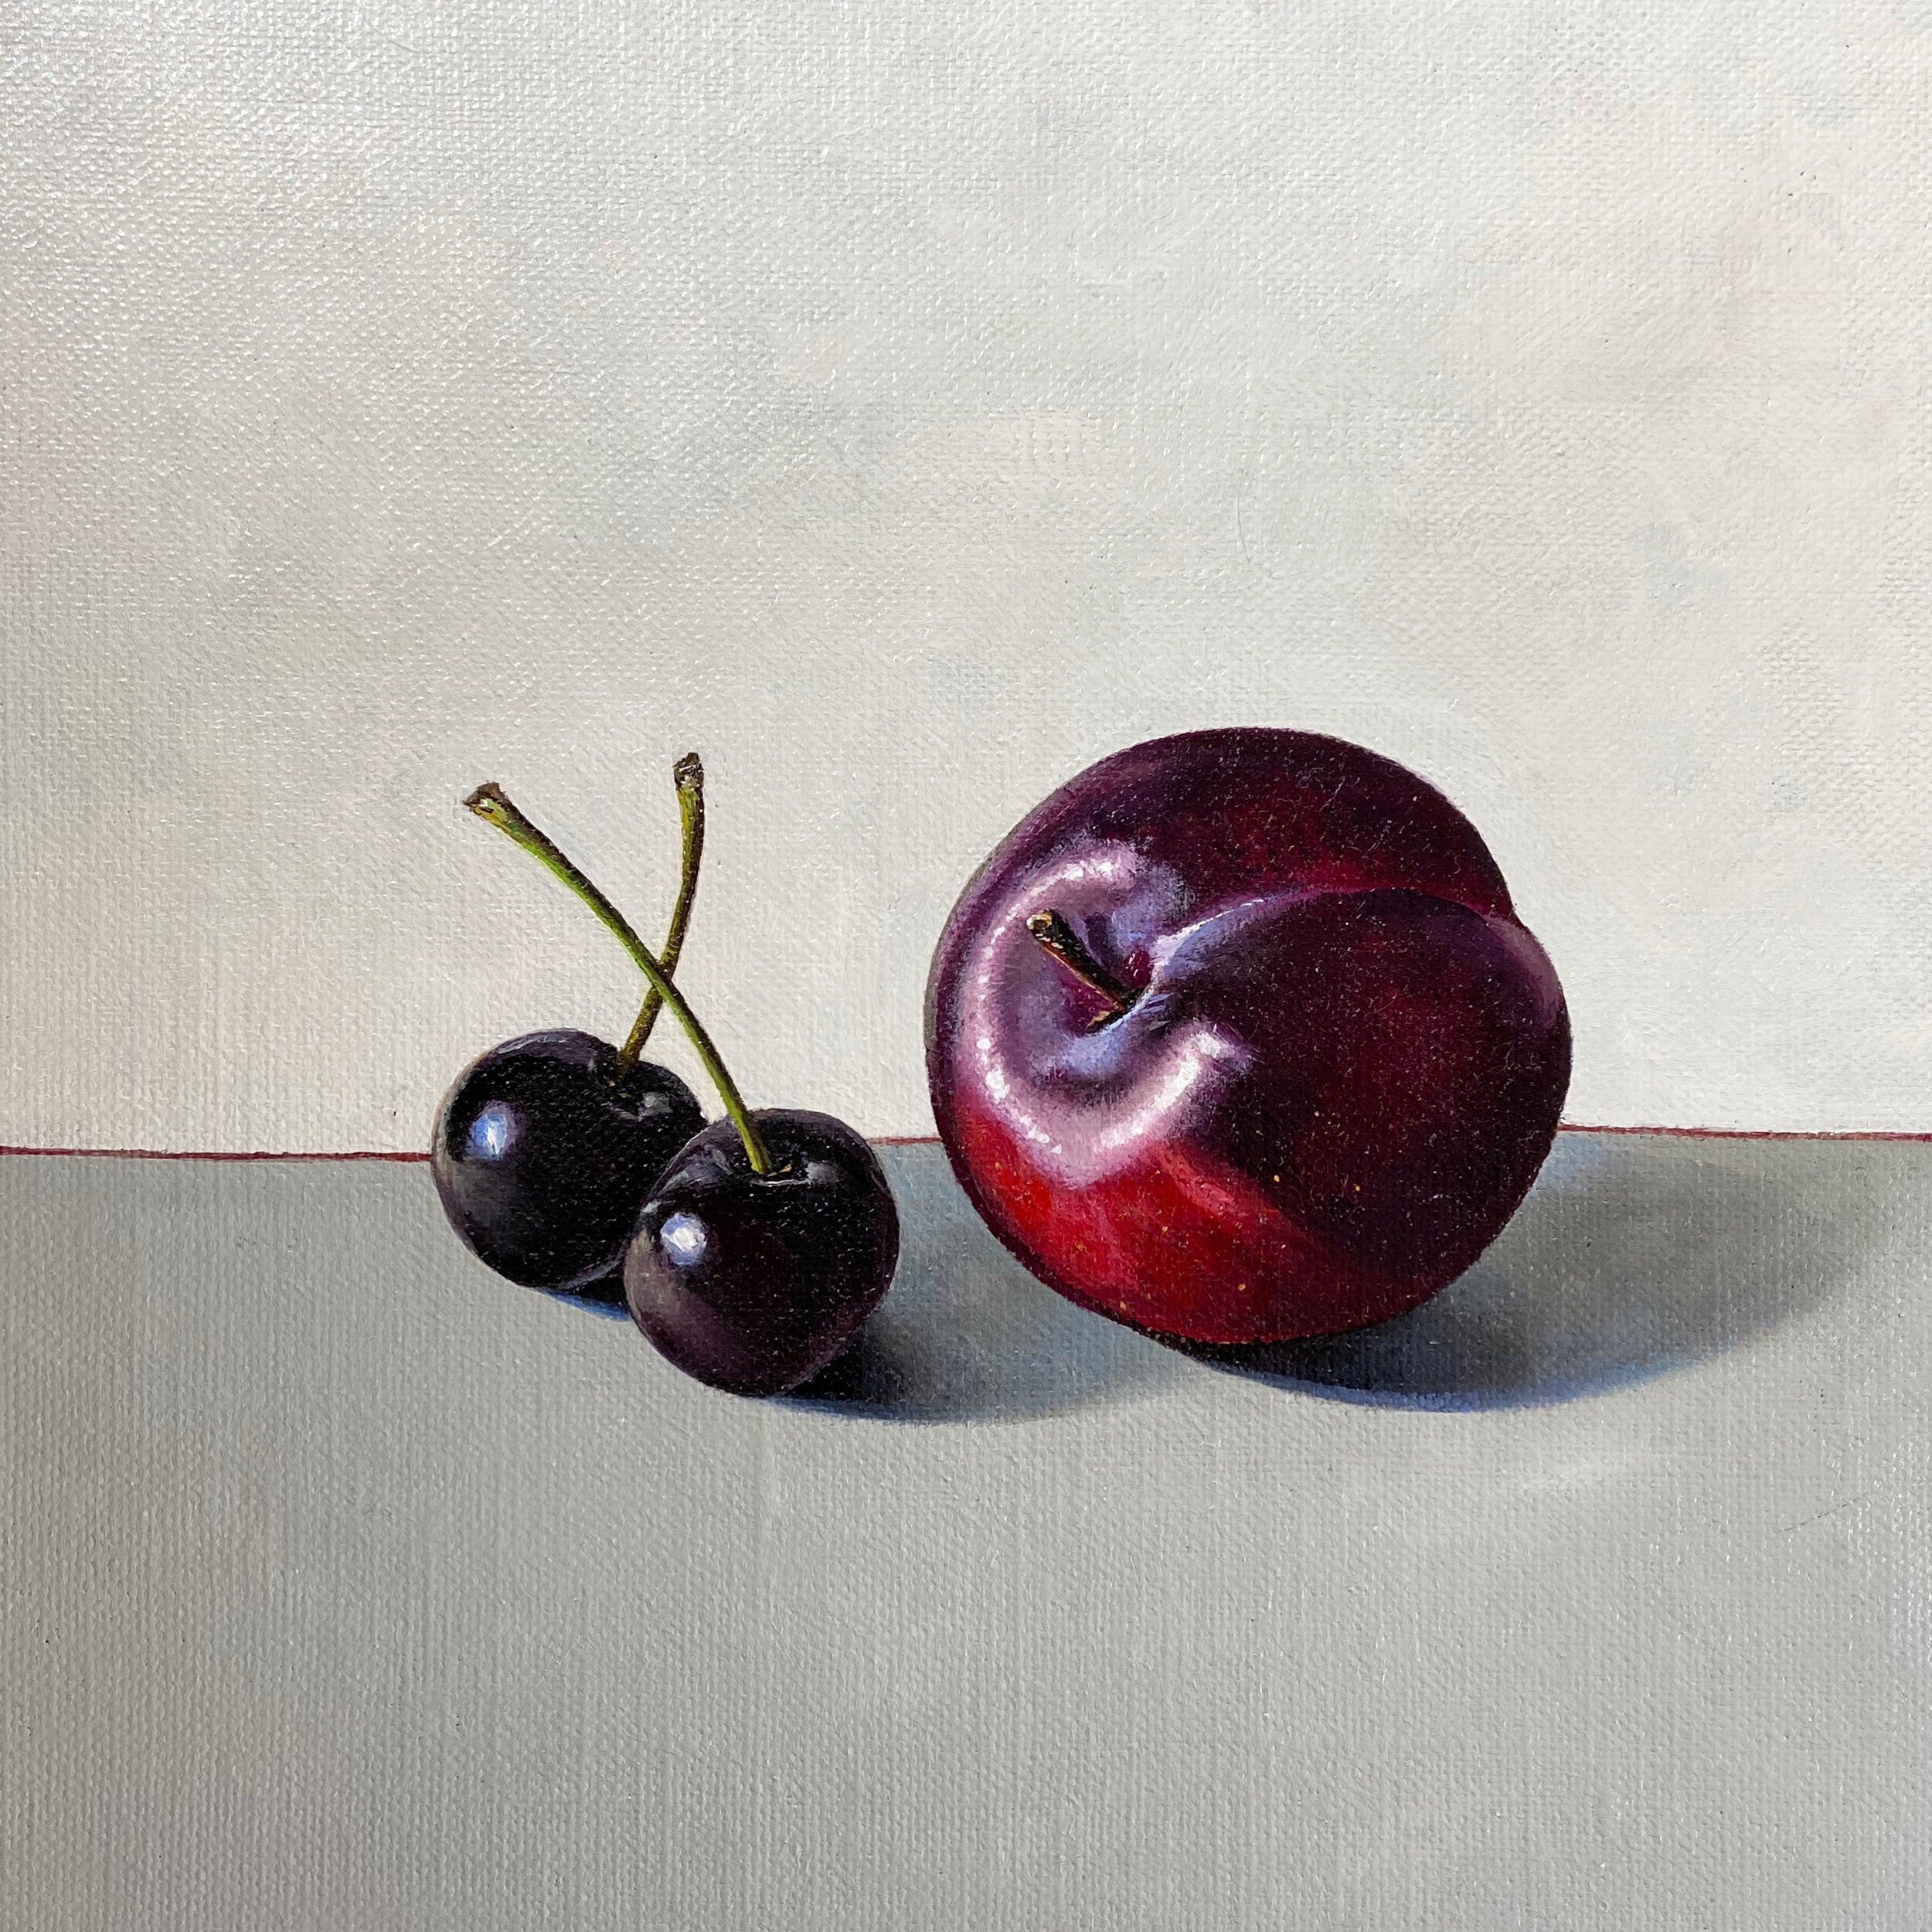 Plum with two black cherries